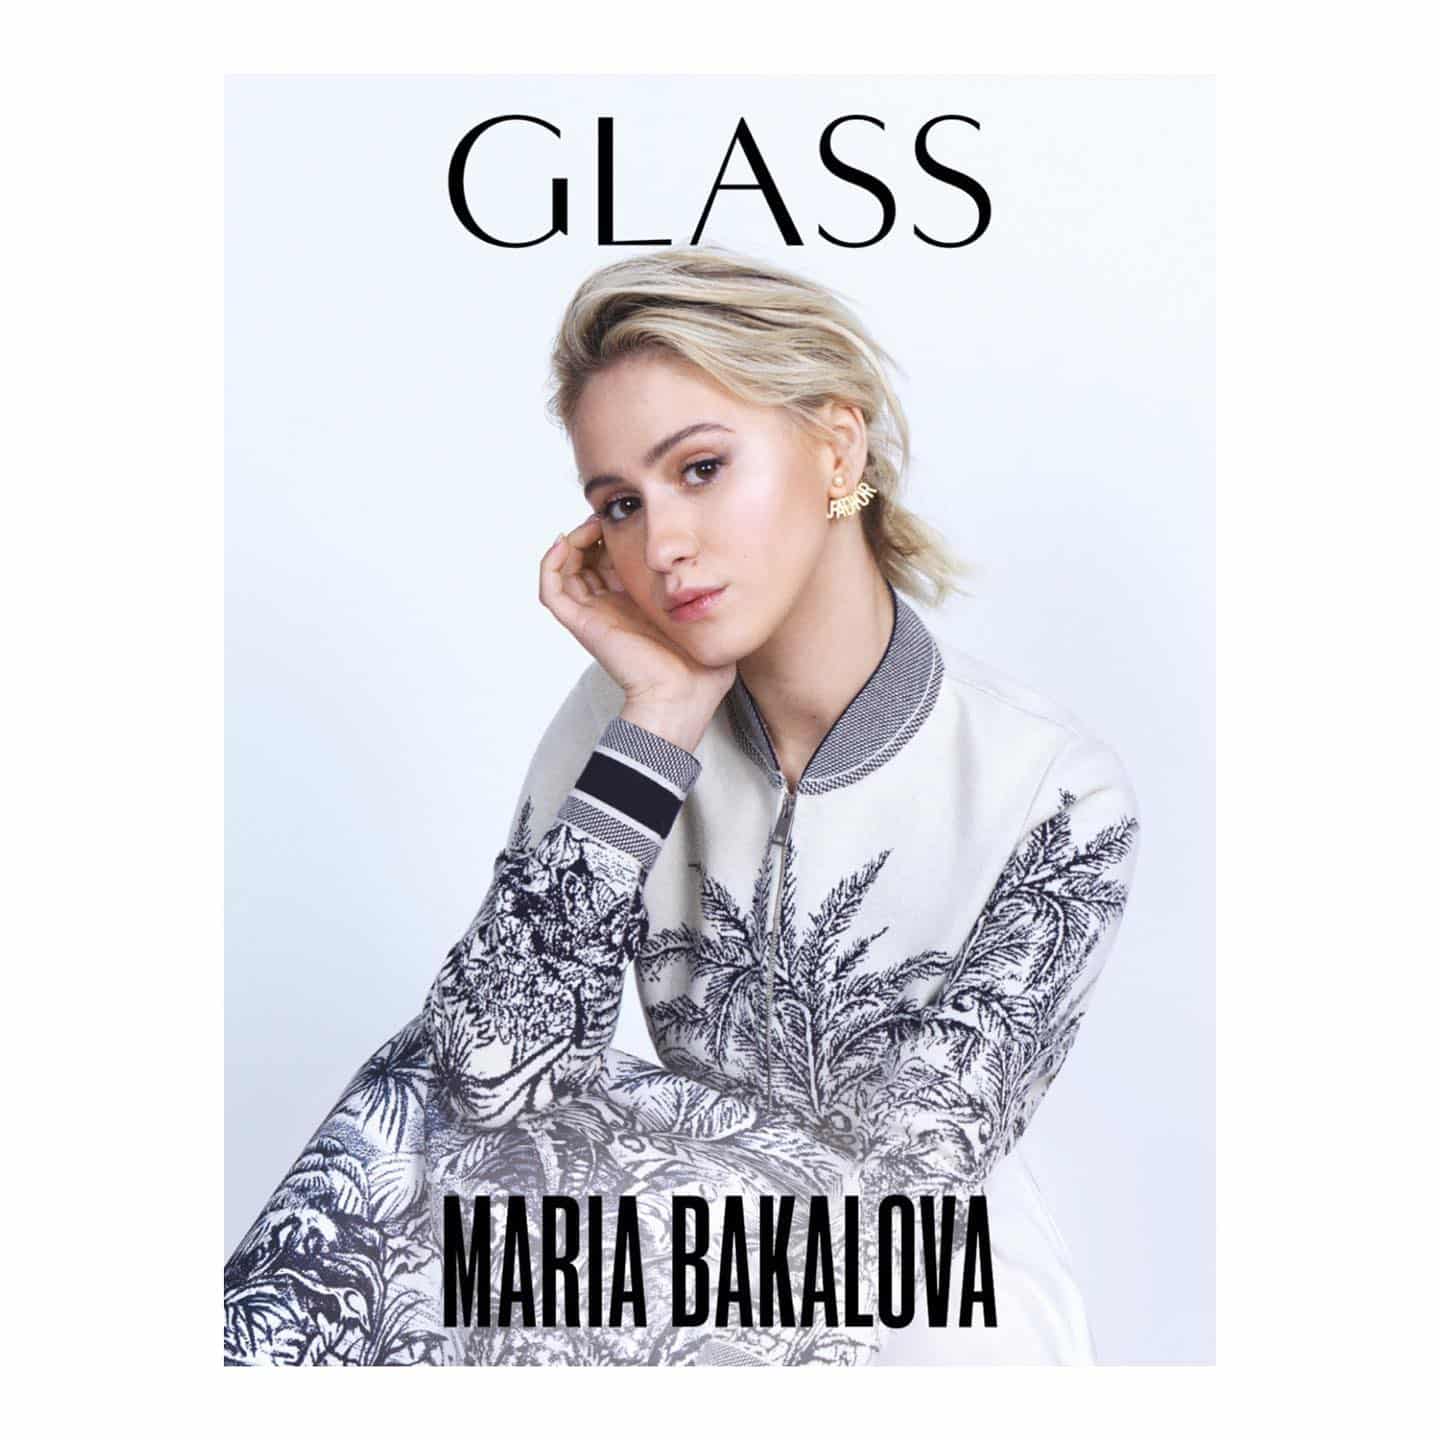 @mariabakalovaofficial graces the cover of @theglassmagazine discussing her @theacademy and @bafta nominated  role in 
.
.
.
📸: @josephsinclair 
: @hollyevawhite @dior 
: @kaymontano @thewallgroup 
🏼‍♀️: @patrickwilson  @thewallgroup 
@connortegan @zorica.zorica 
Location: @uncommon_space 
.
.